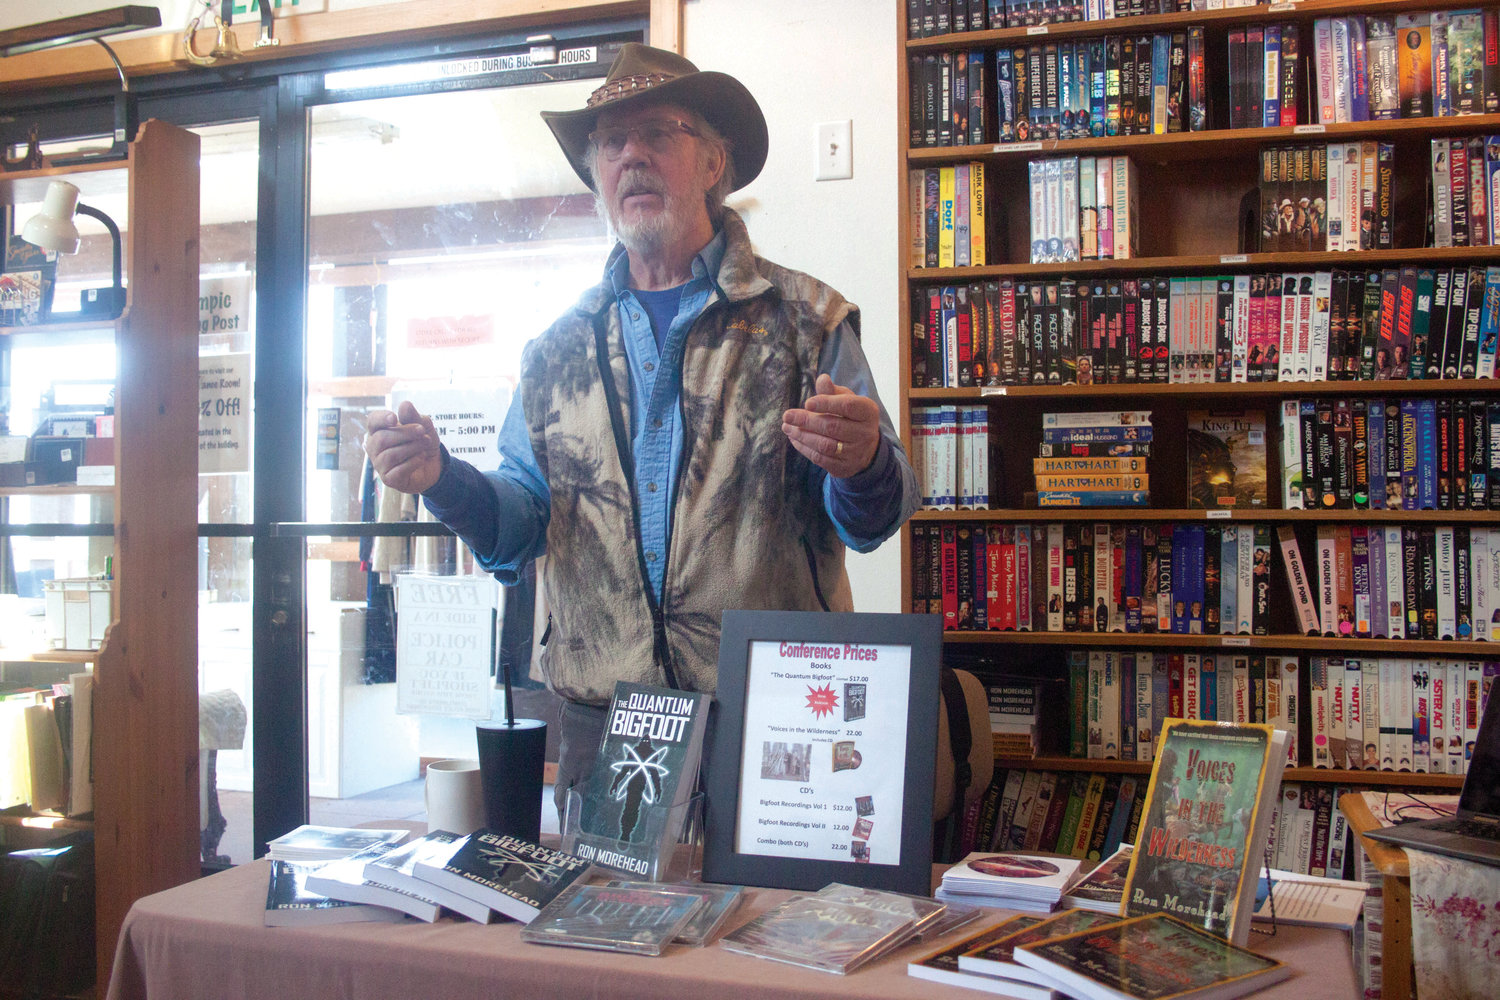 Sequim’s Ron Morehead recounts his encounters with Sasquatch to an audience at the Olympic Trading Post in Chimacum March 2, occasionally playing recordings of what he believes to be Bigfoot calls.